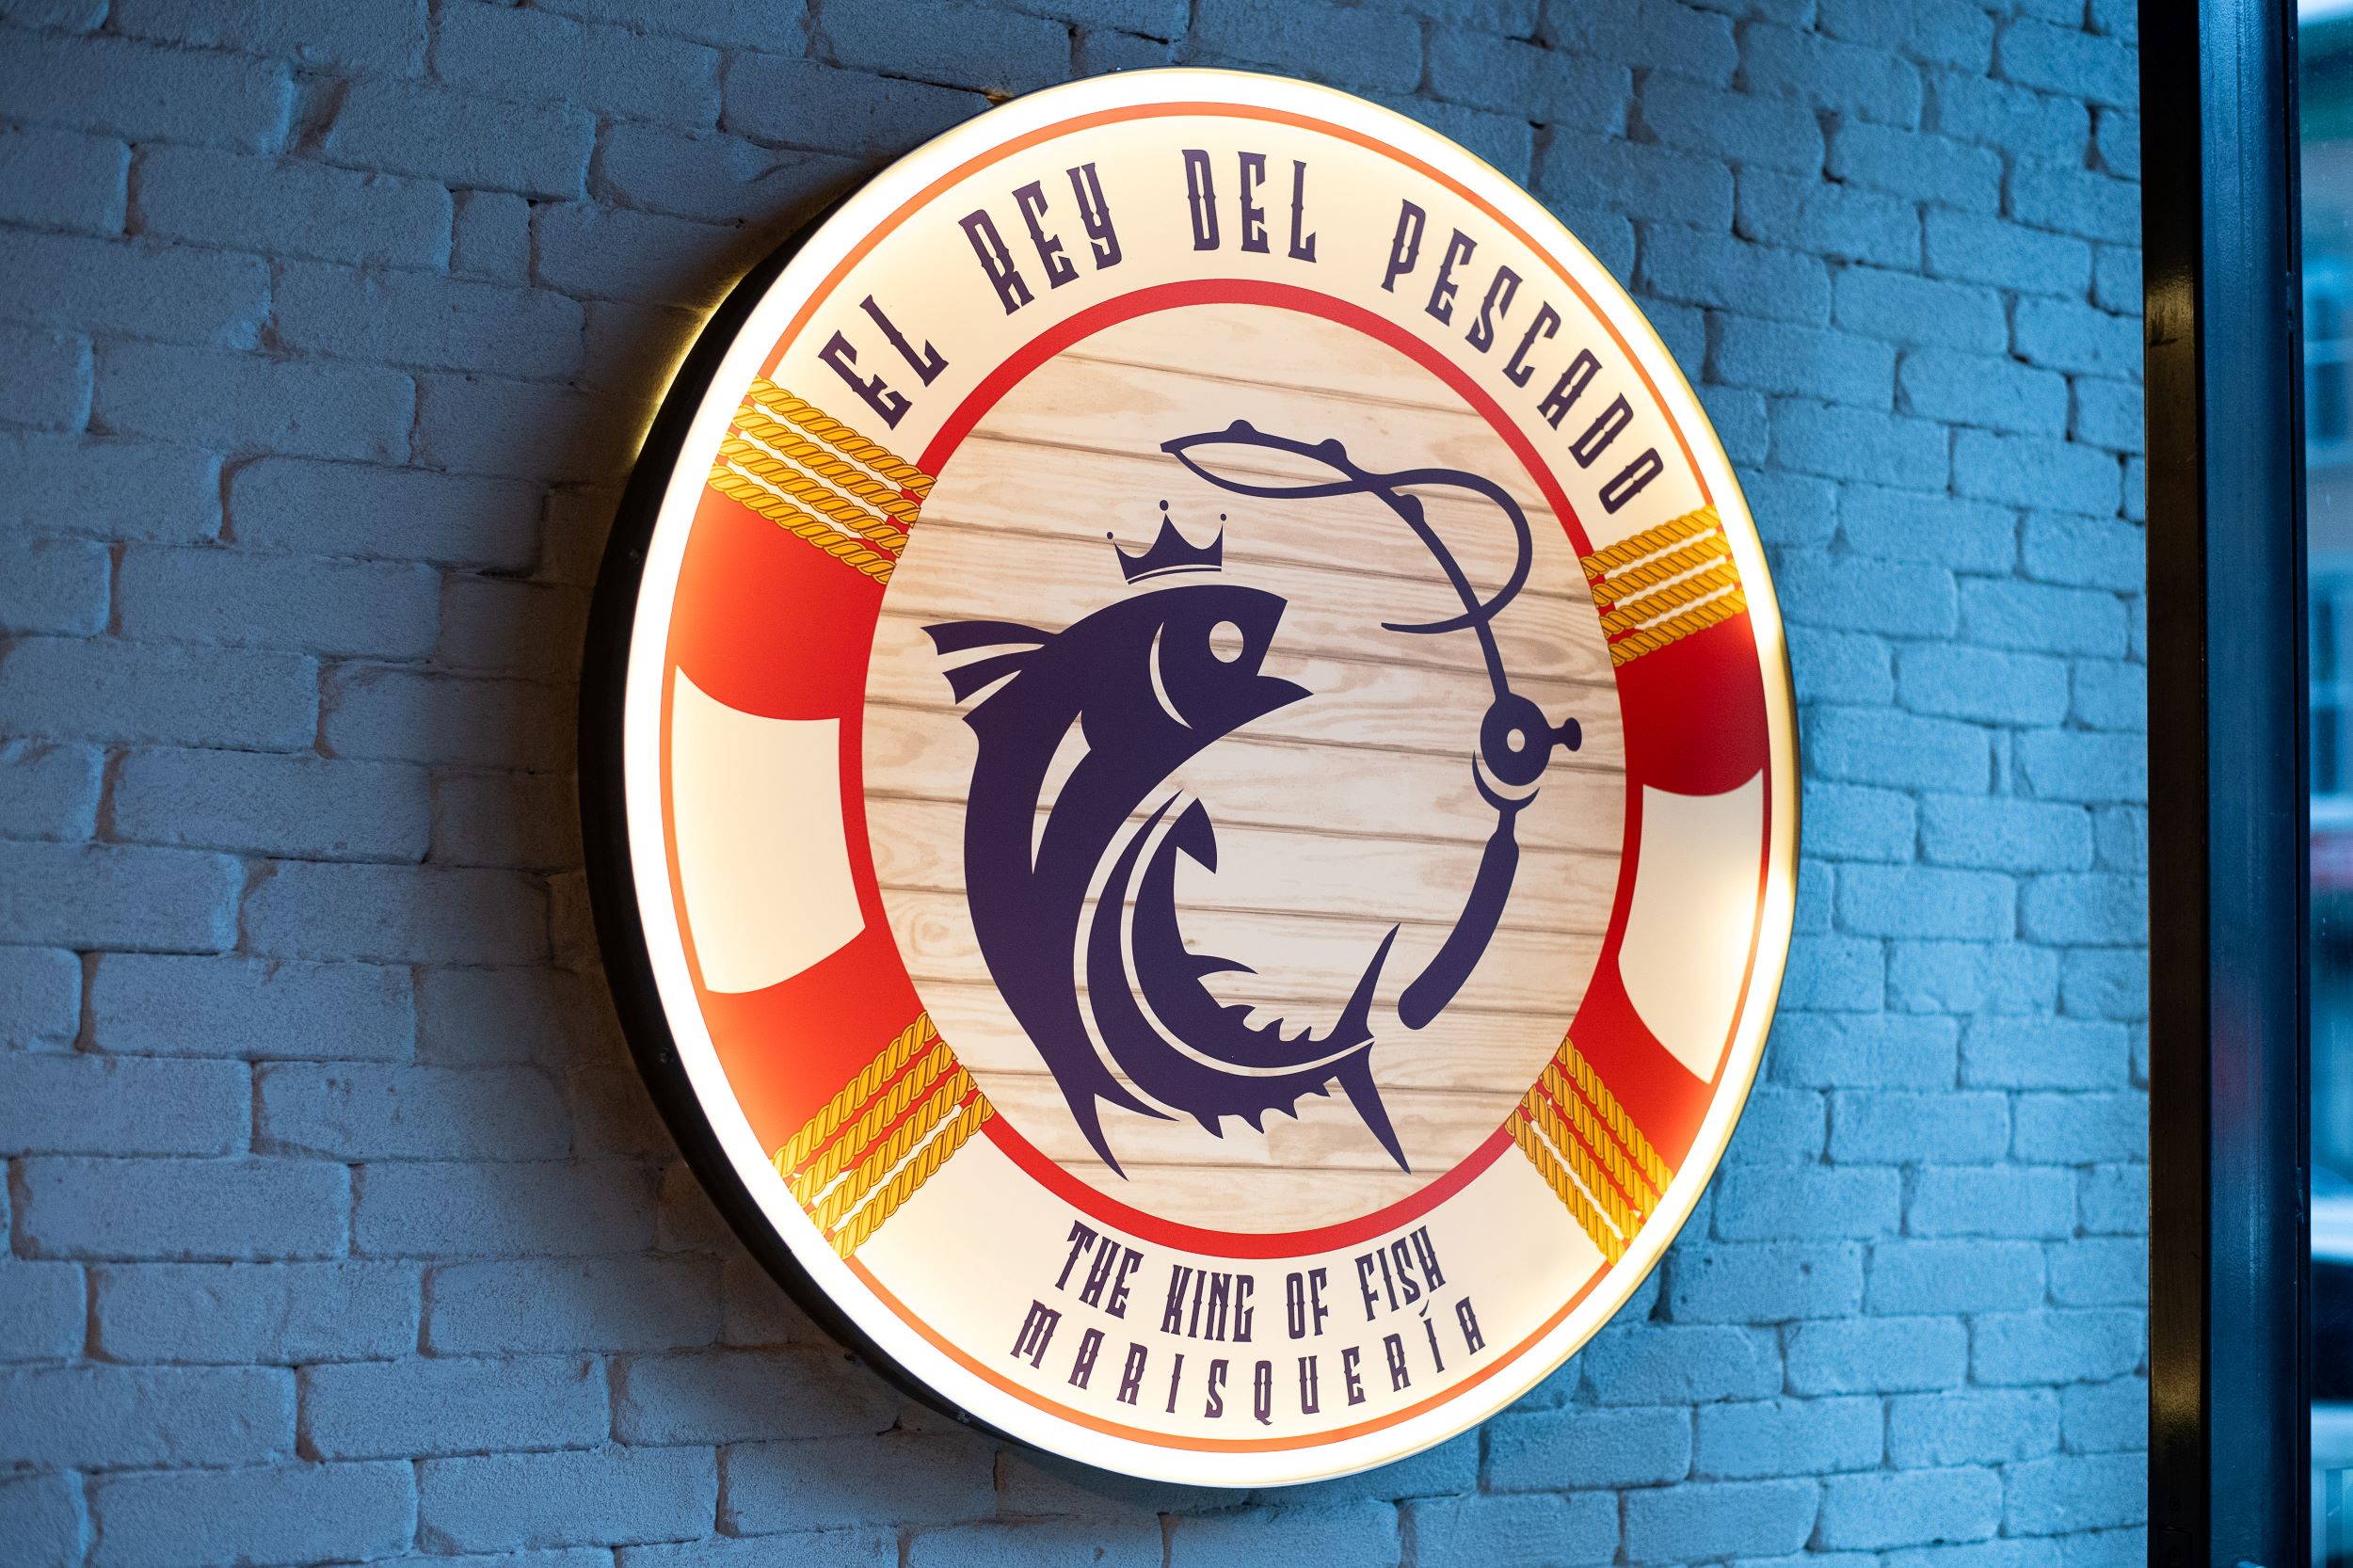 A colorful circular sign on a blue brick wall reading "el rey del pescado - the king of fish marisquería," featuring stylized graphics of two fish and sun rays.